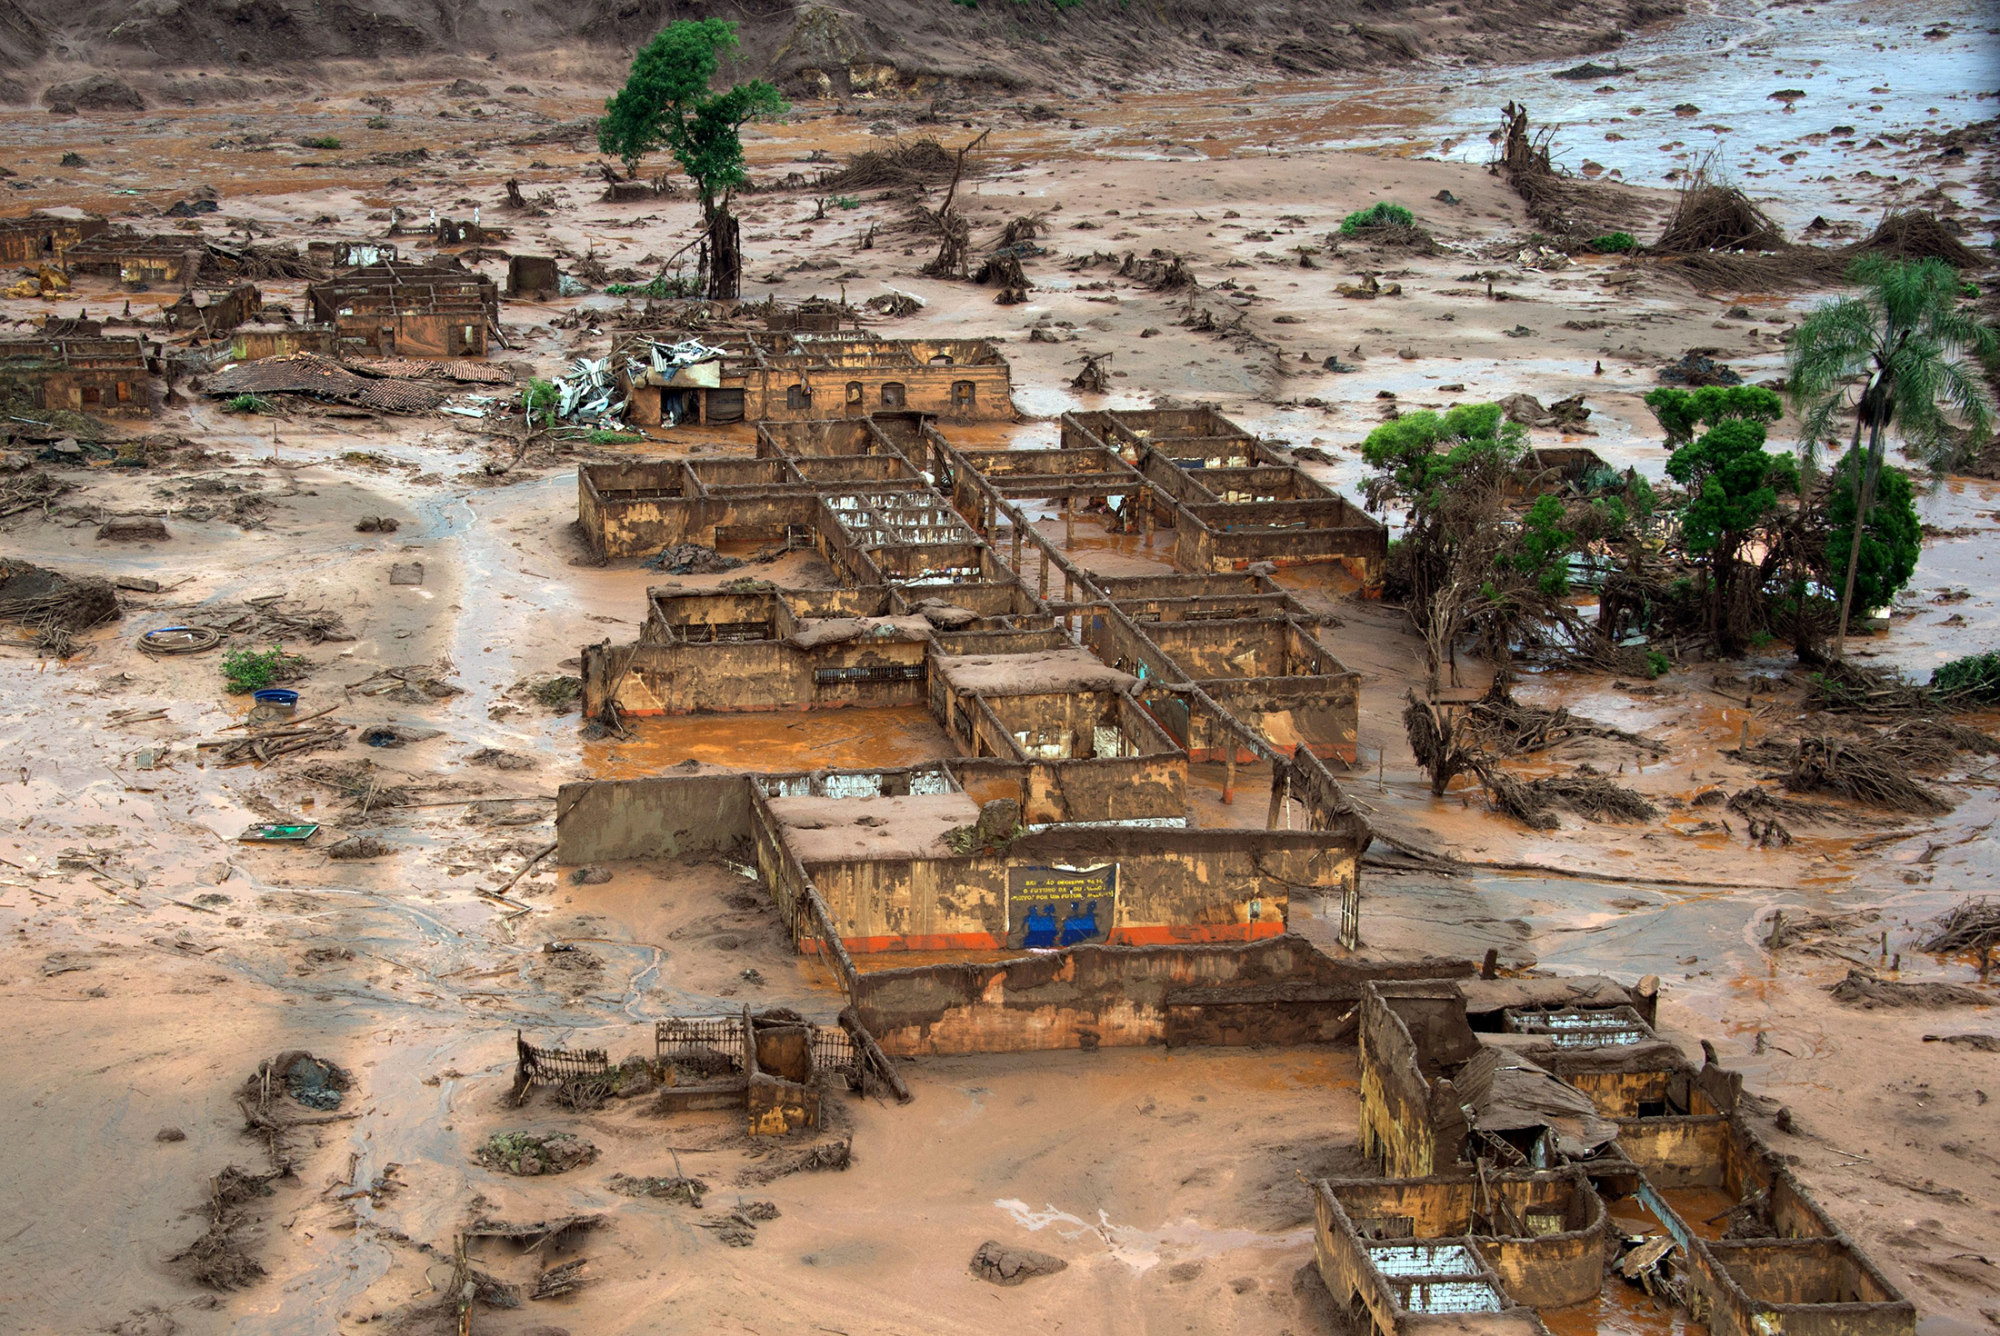 Aerial view of damages after a dam burst in the village of Bento Rodrigues, in Mariana, Minas Gerais state, Brazil on November 6, 2015. Photographer: Christophe Simon/AFP via Getty Images
